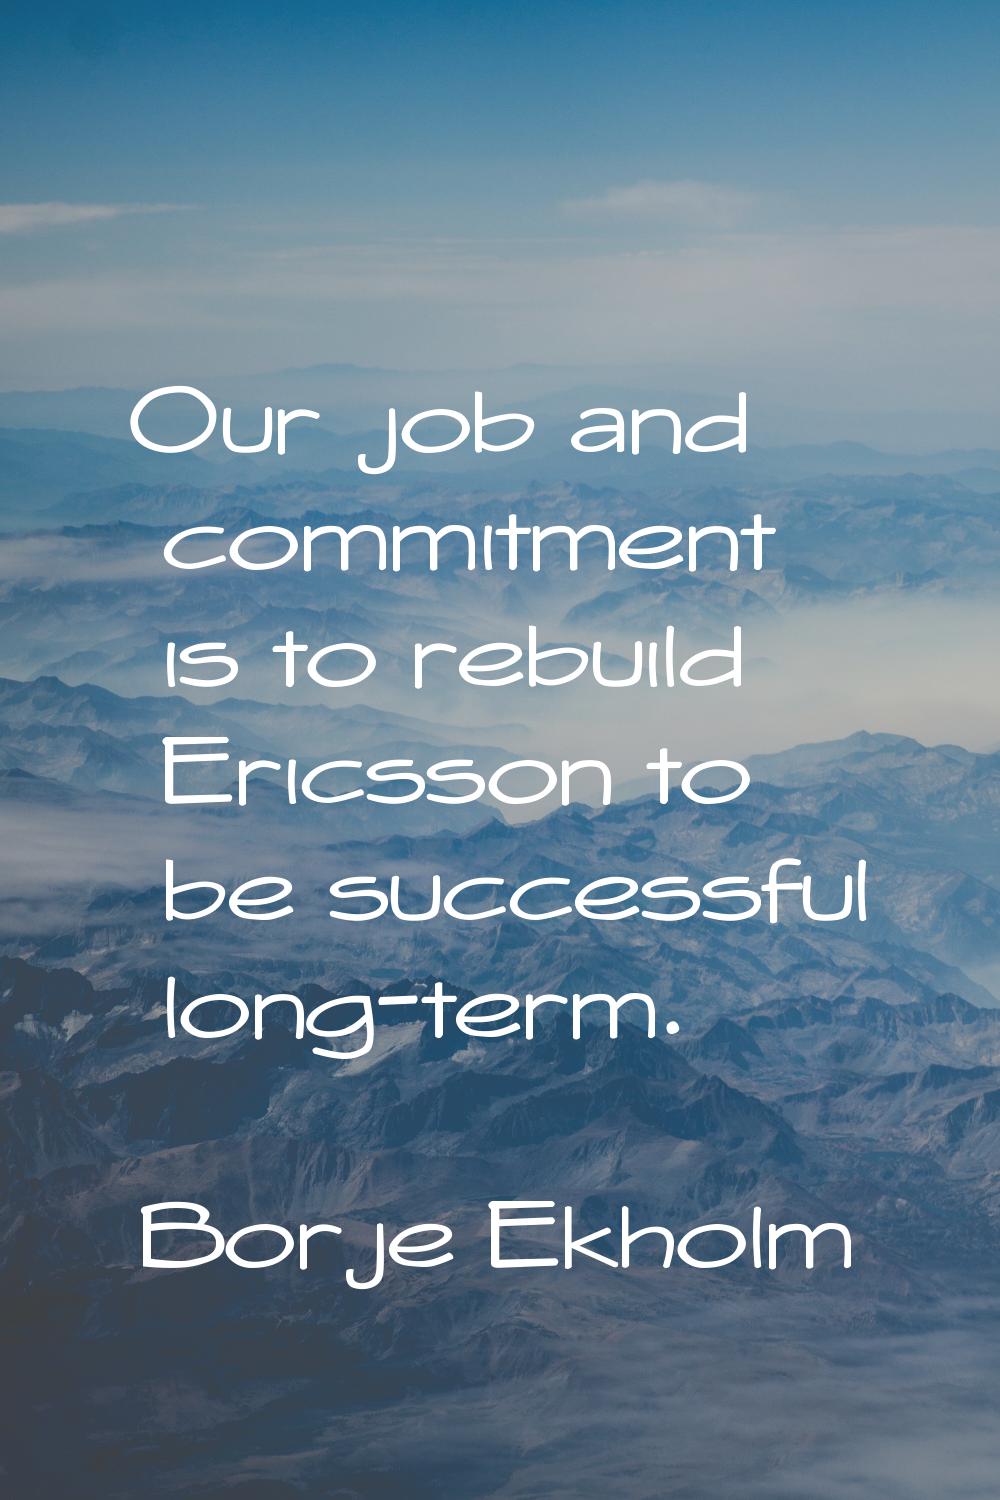 Our job and commitment is to rebuild Ericsson to be successful long-term.